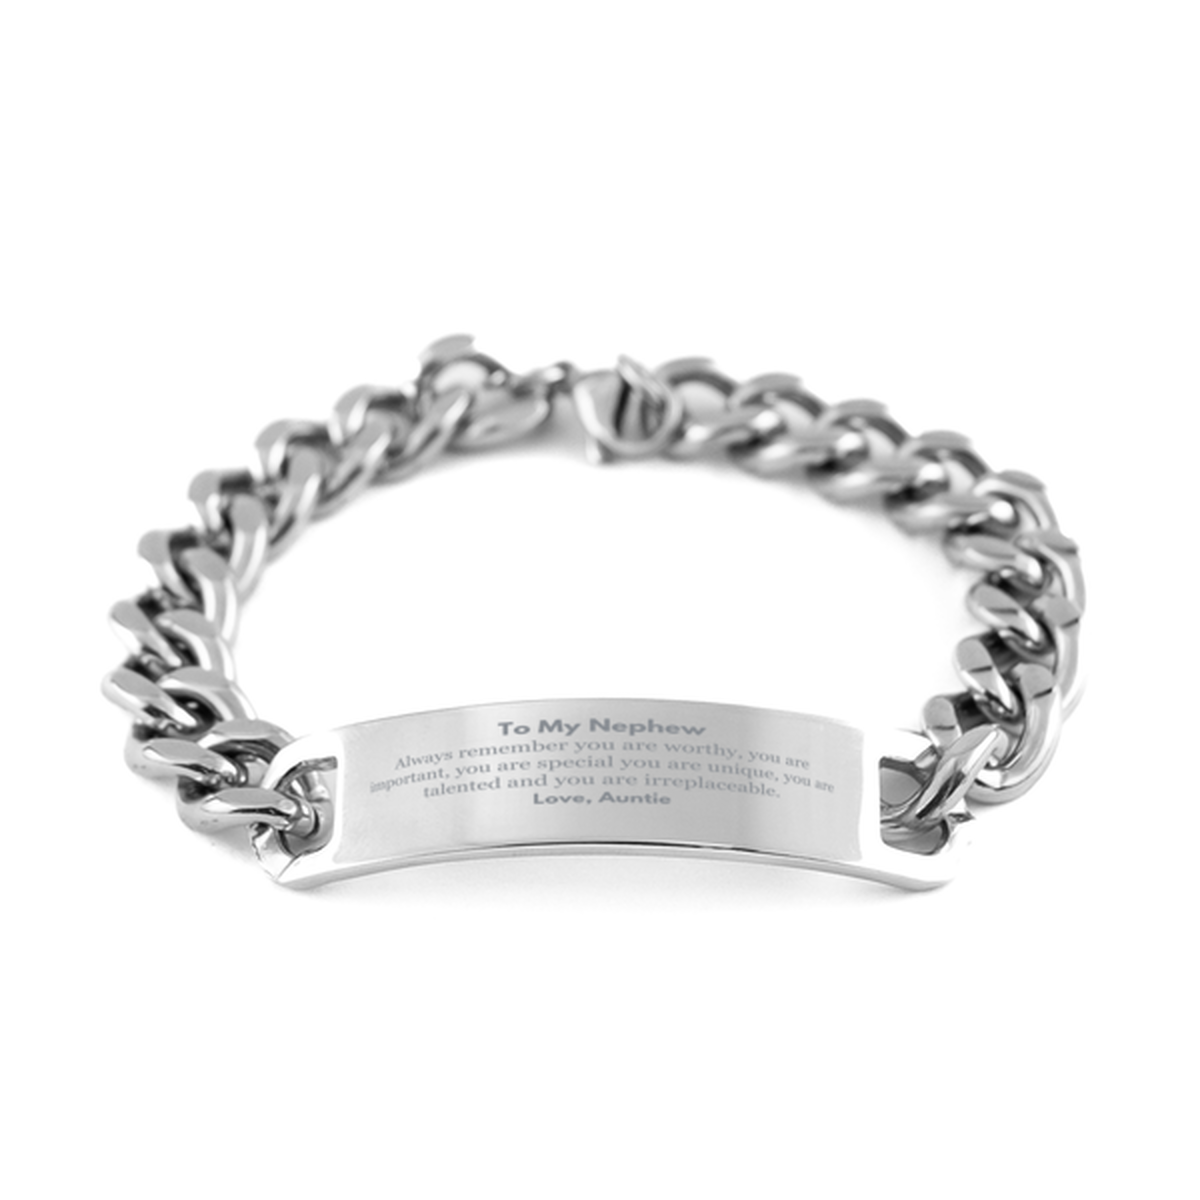 Nephew Birthday Gifts from Auntie, Inspirational Cuban Chain Stainless Steel Bracelet for Nephew Christmas Graduation Gifts for Nephew Always remember you are worthy, you are important. Love, Auntie